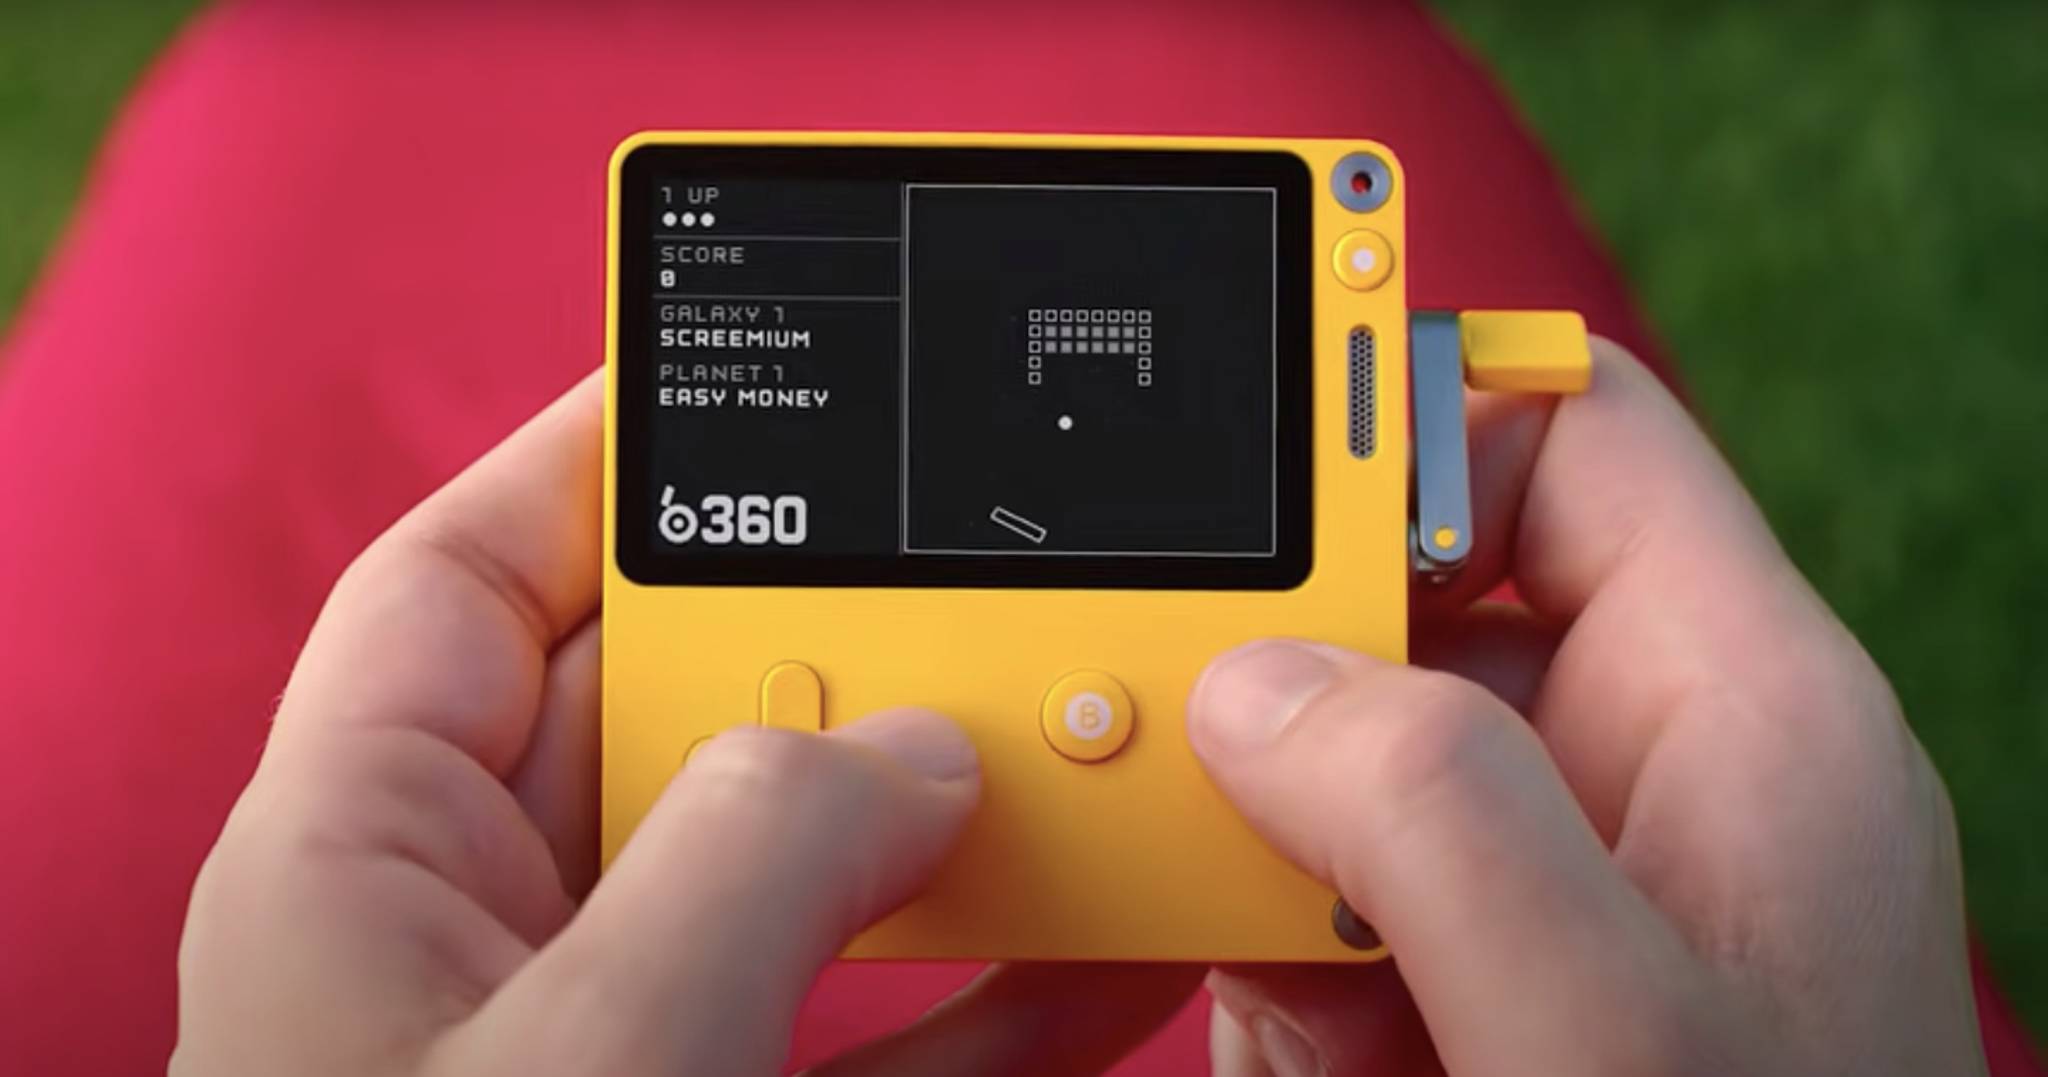 Playdate delights gamers with small and unique device